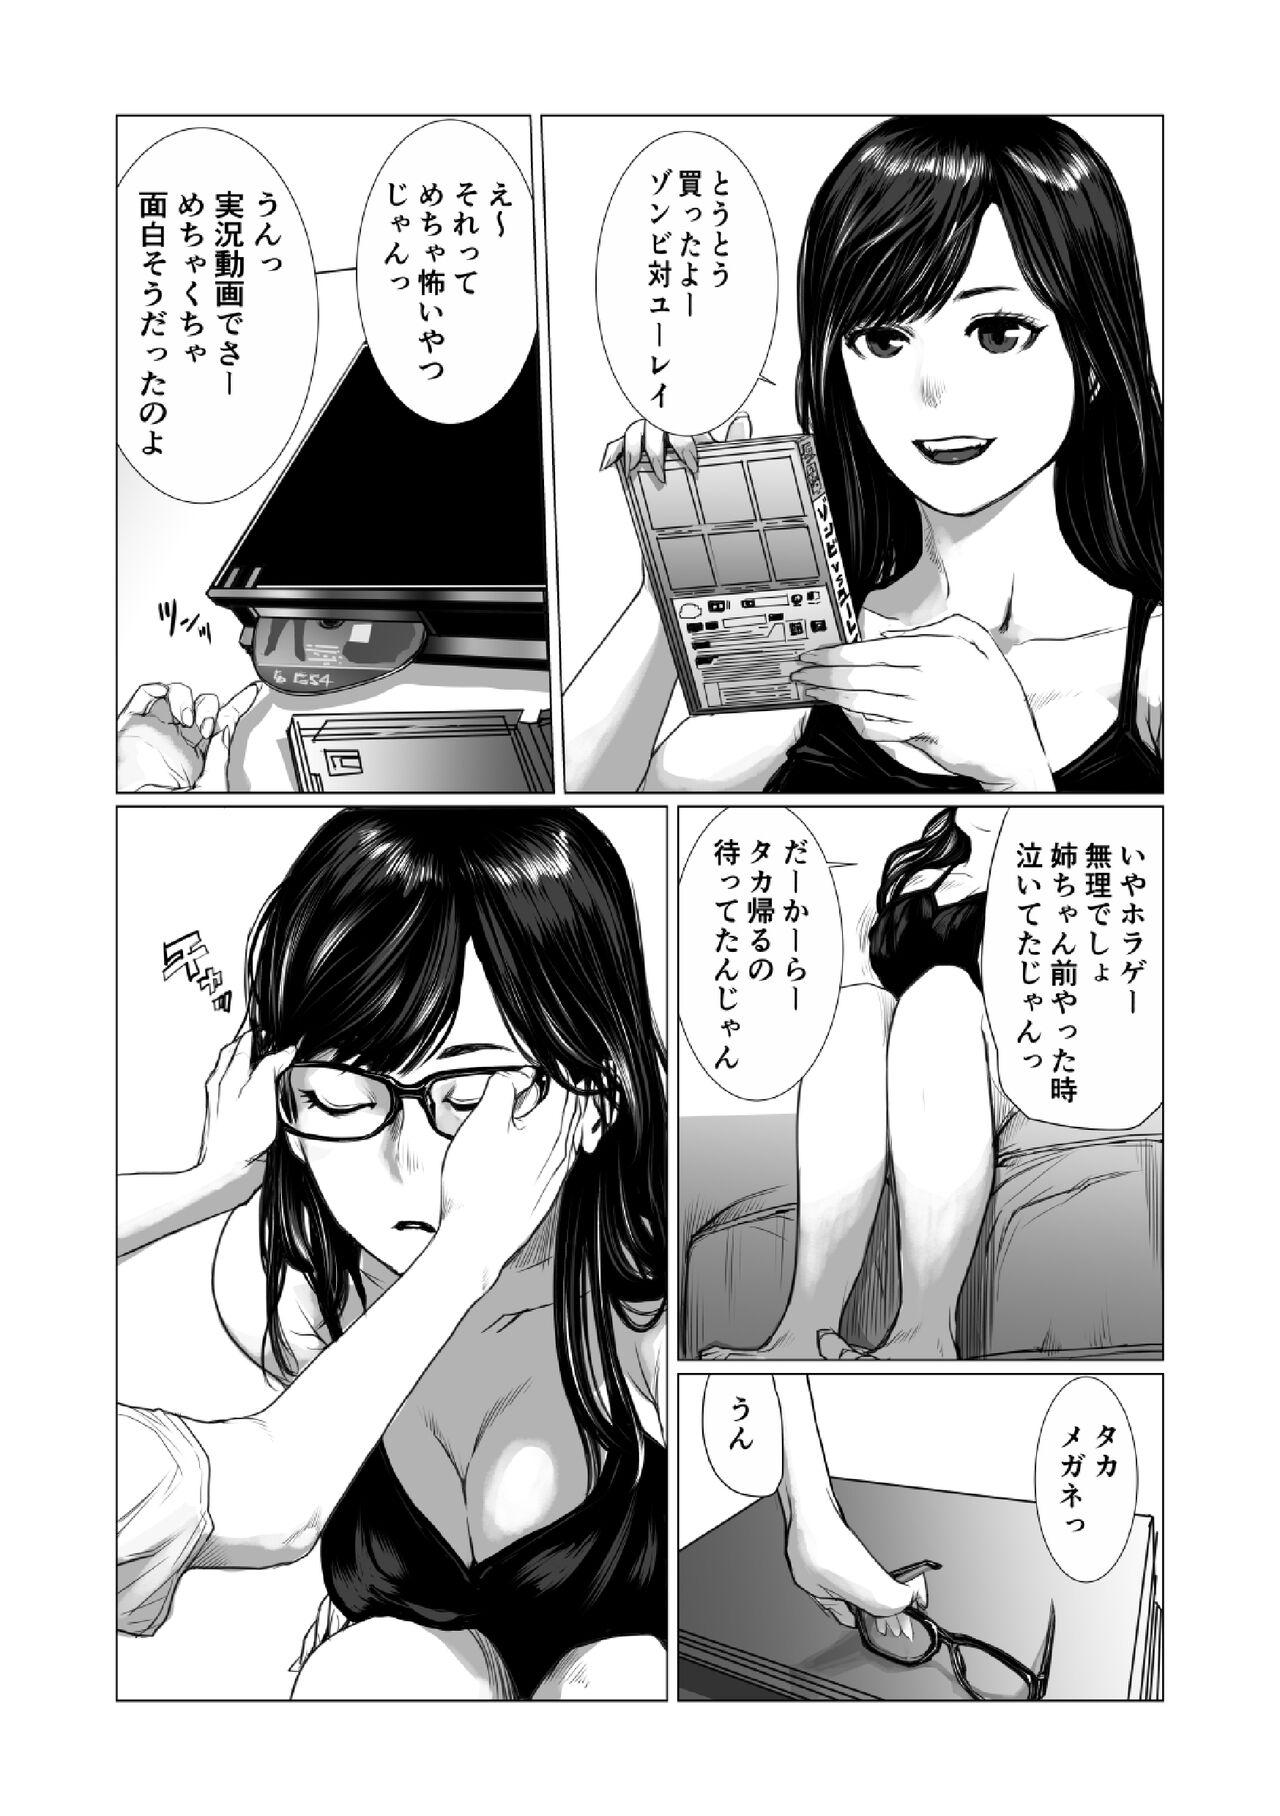 Married 弟のゲーム脳と姉のゲーム性 - Original Holes - Page 4